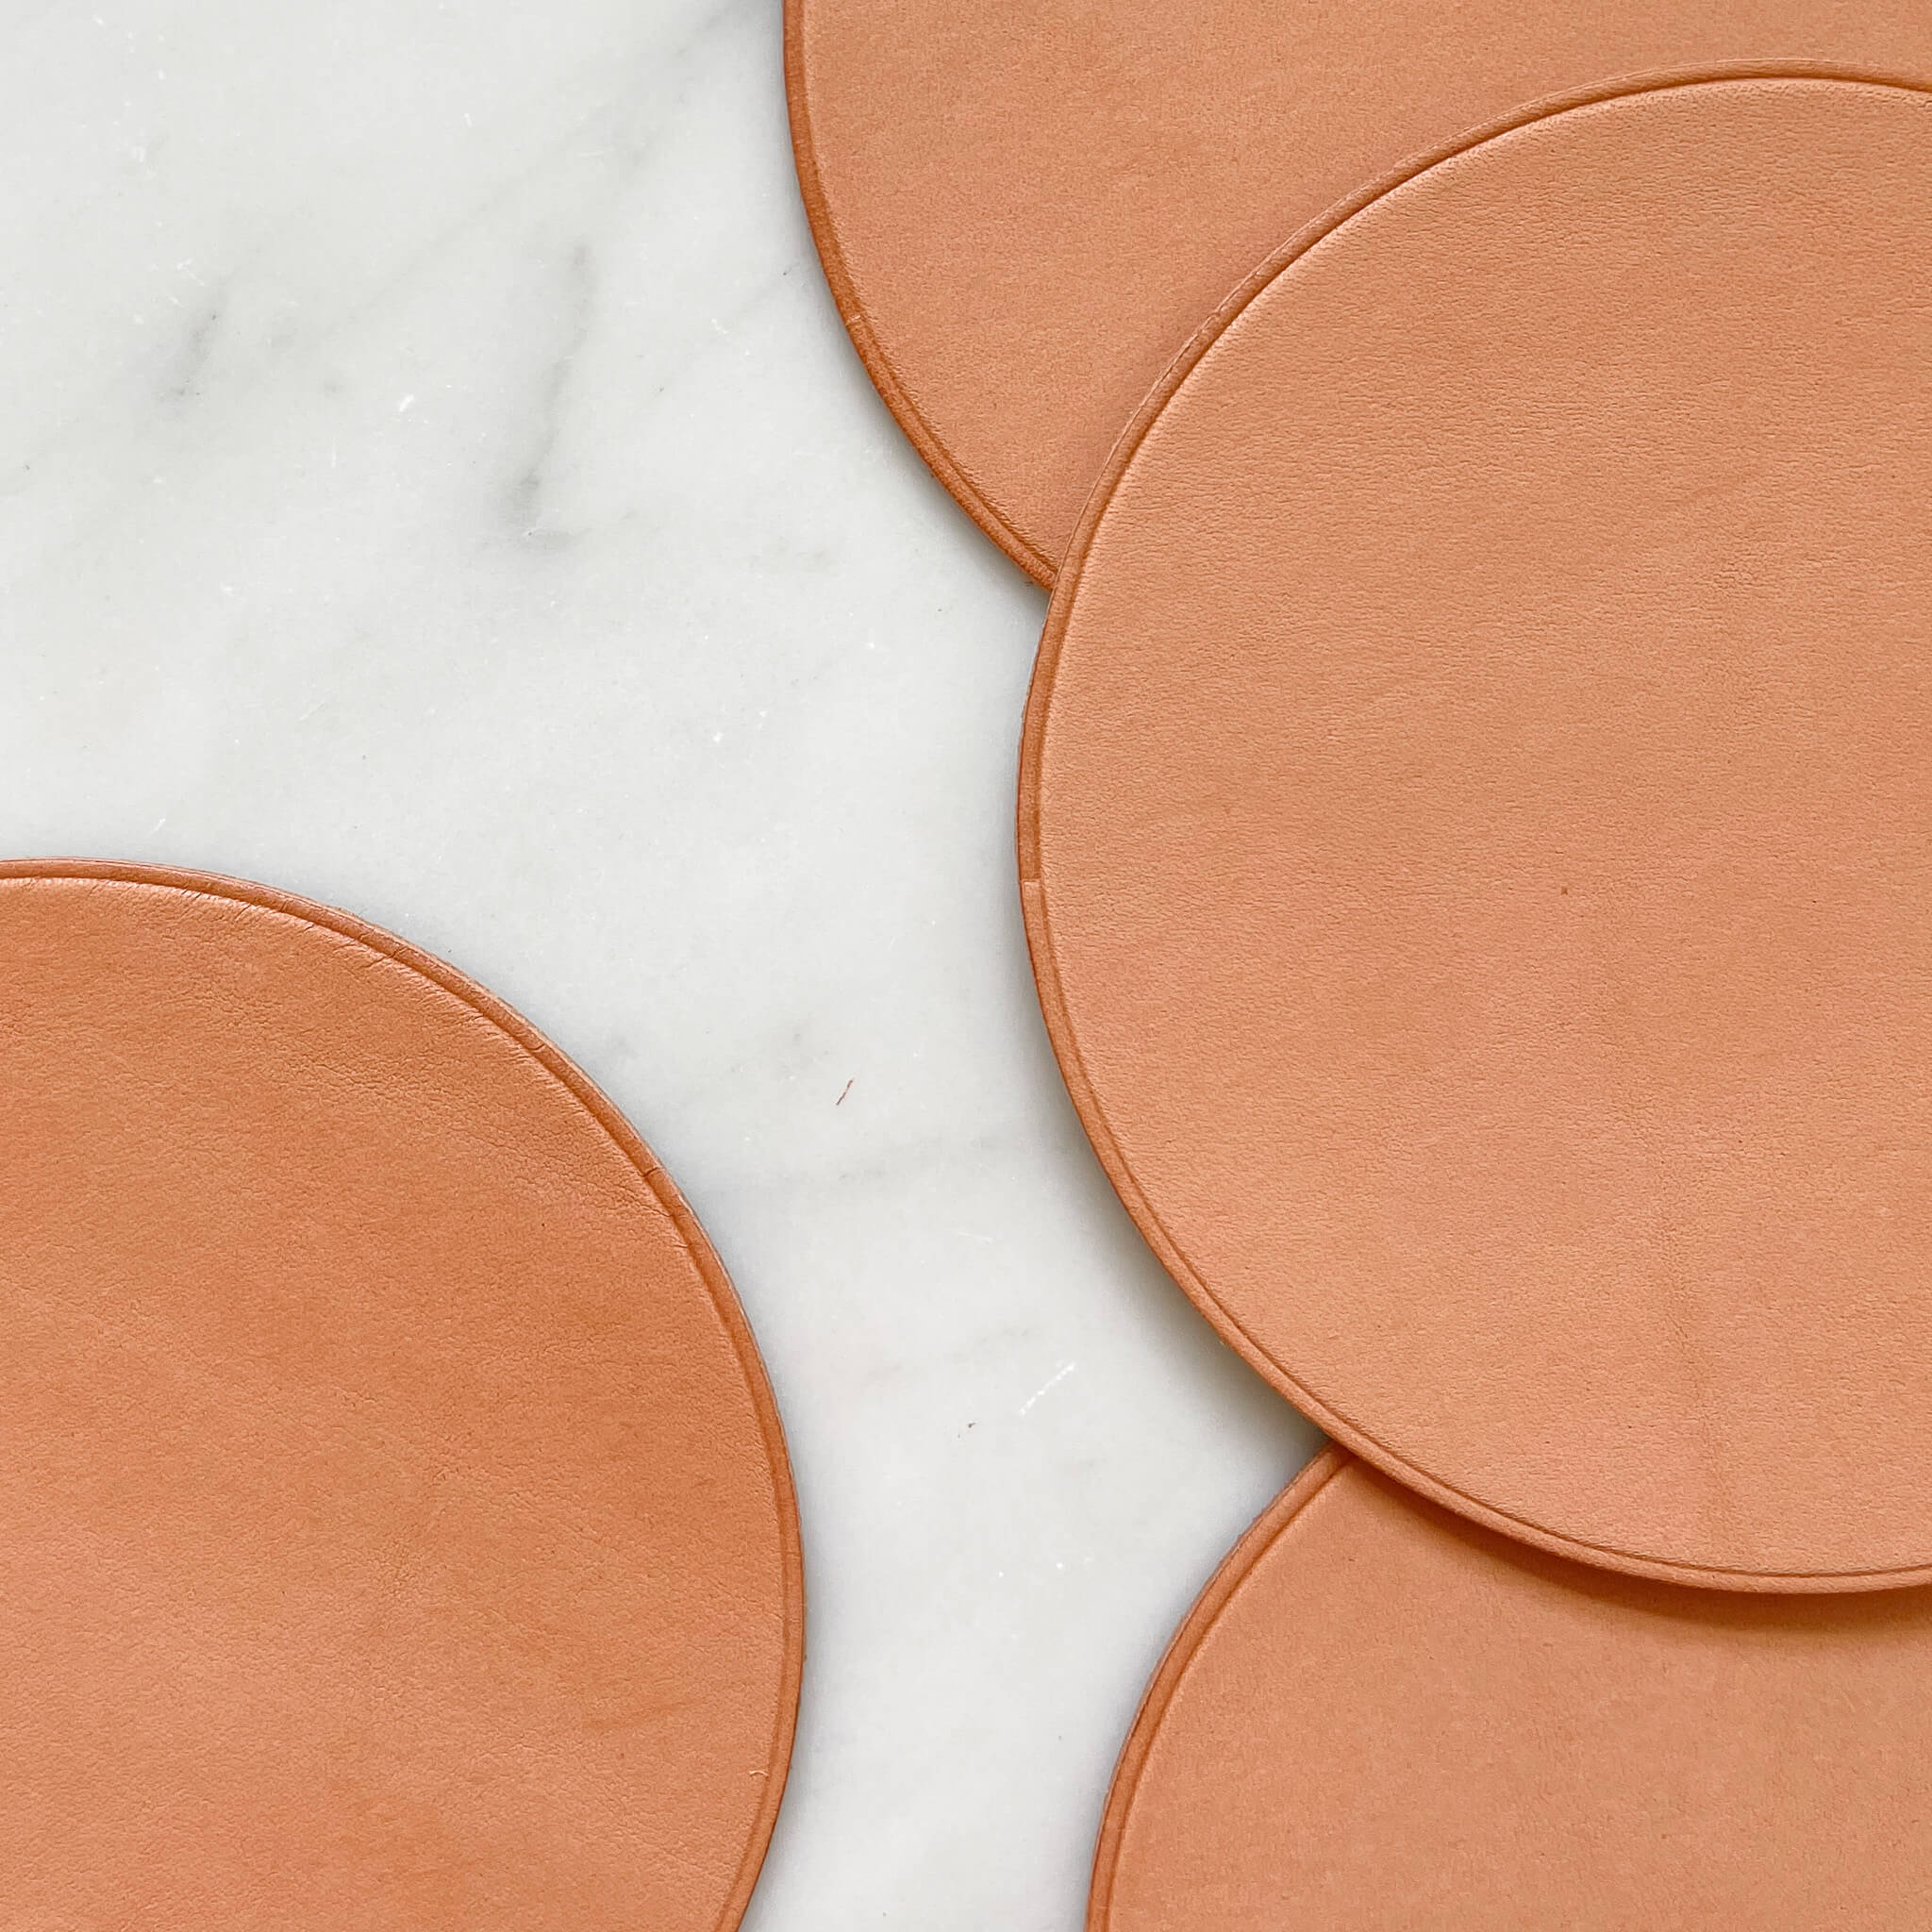 The details on a leather coaster in natural nude made in Baja, Mexico.